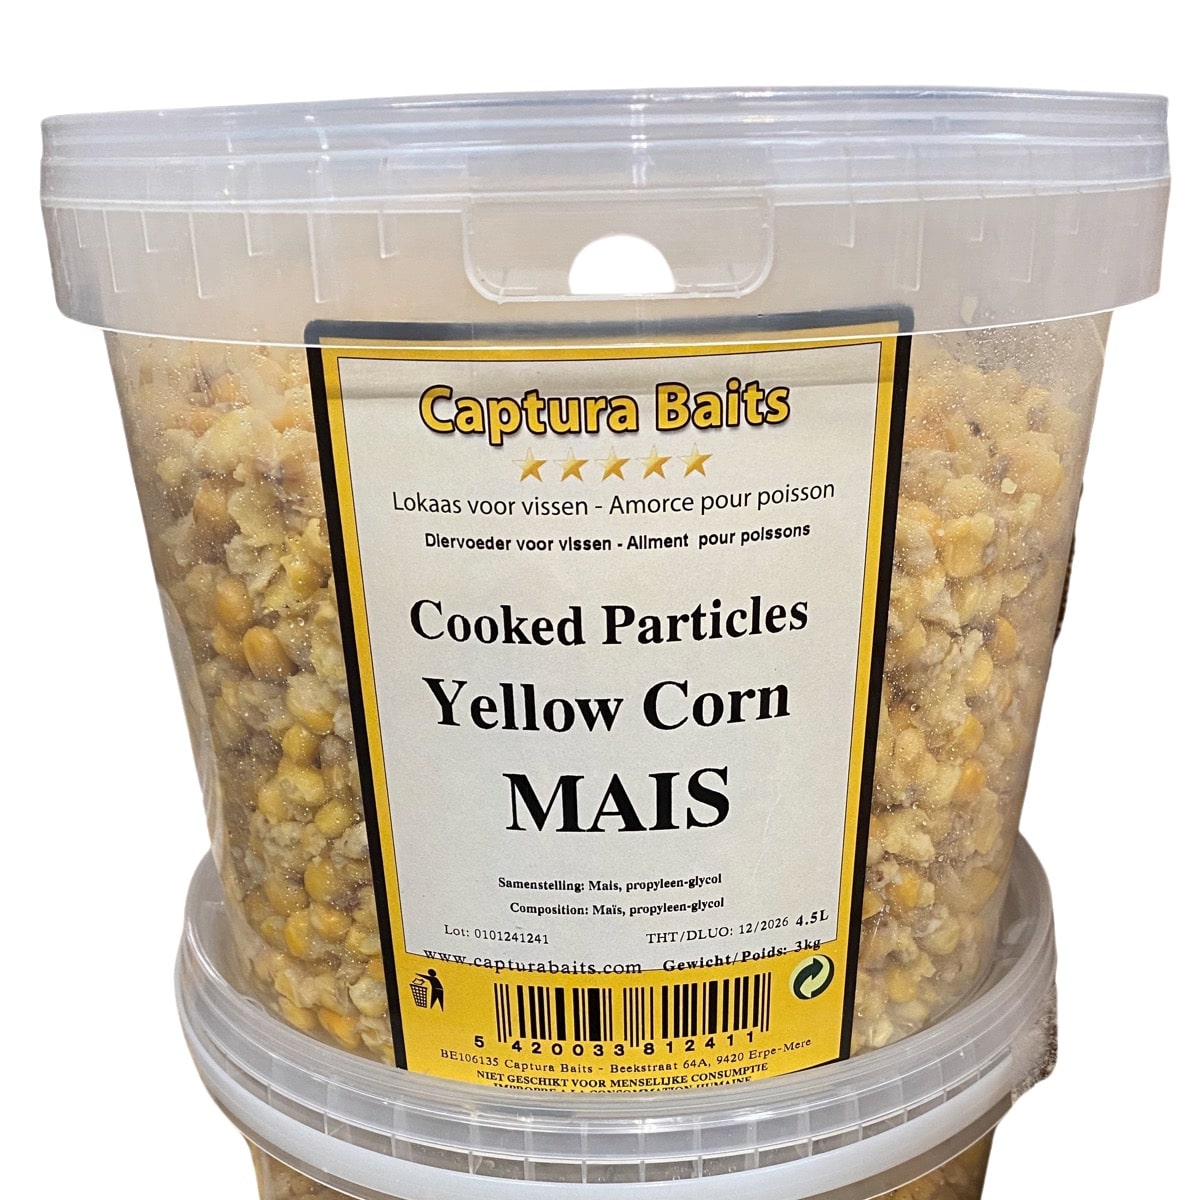 Captura Baits cooked particles yellow corn 3kg bucket